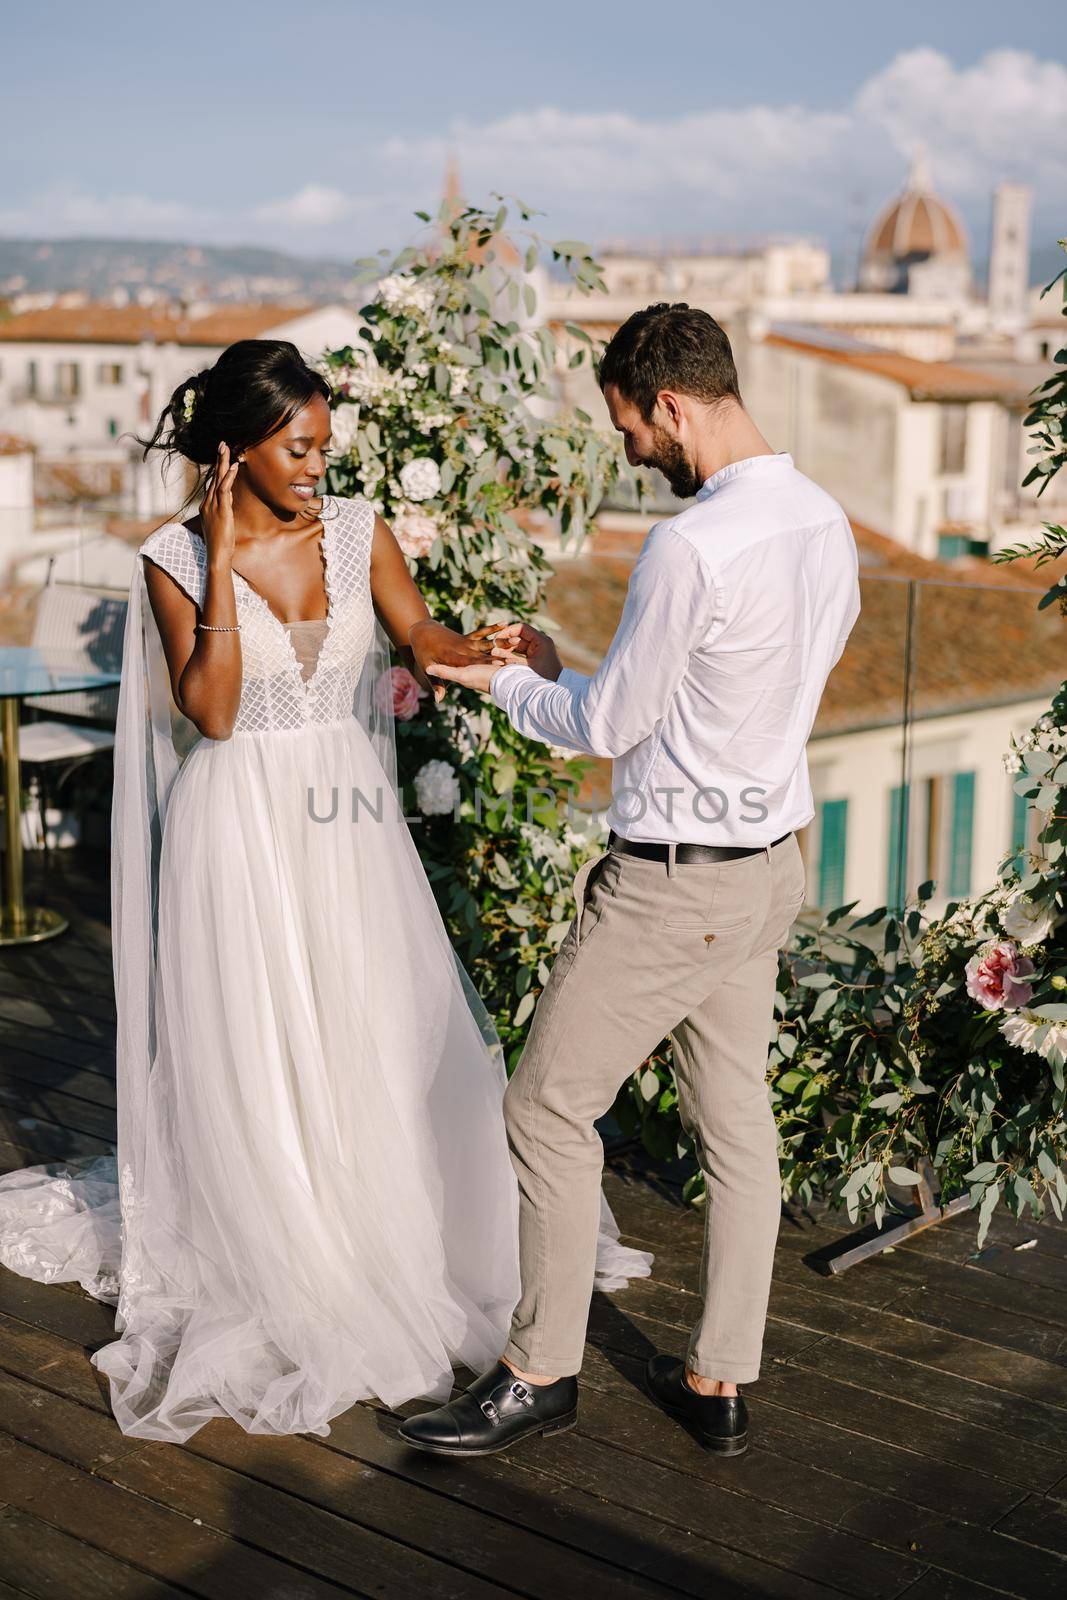 Interracial wedding couple. Destination fine-art wedding in Florence, Italy. A wedding ceremony on the roof of the building, with cityscape views of the city and the Cathedral of Santa Maria Del Fiore by Nadtochiy